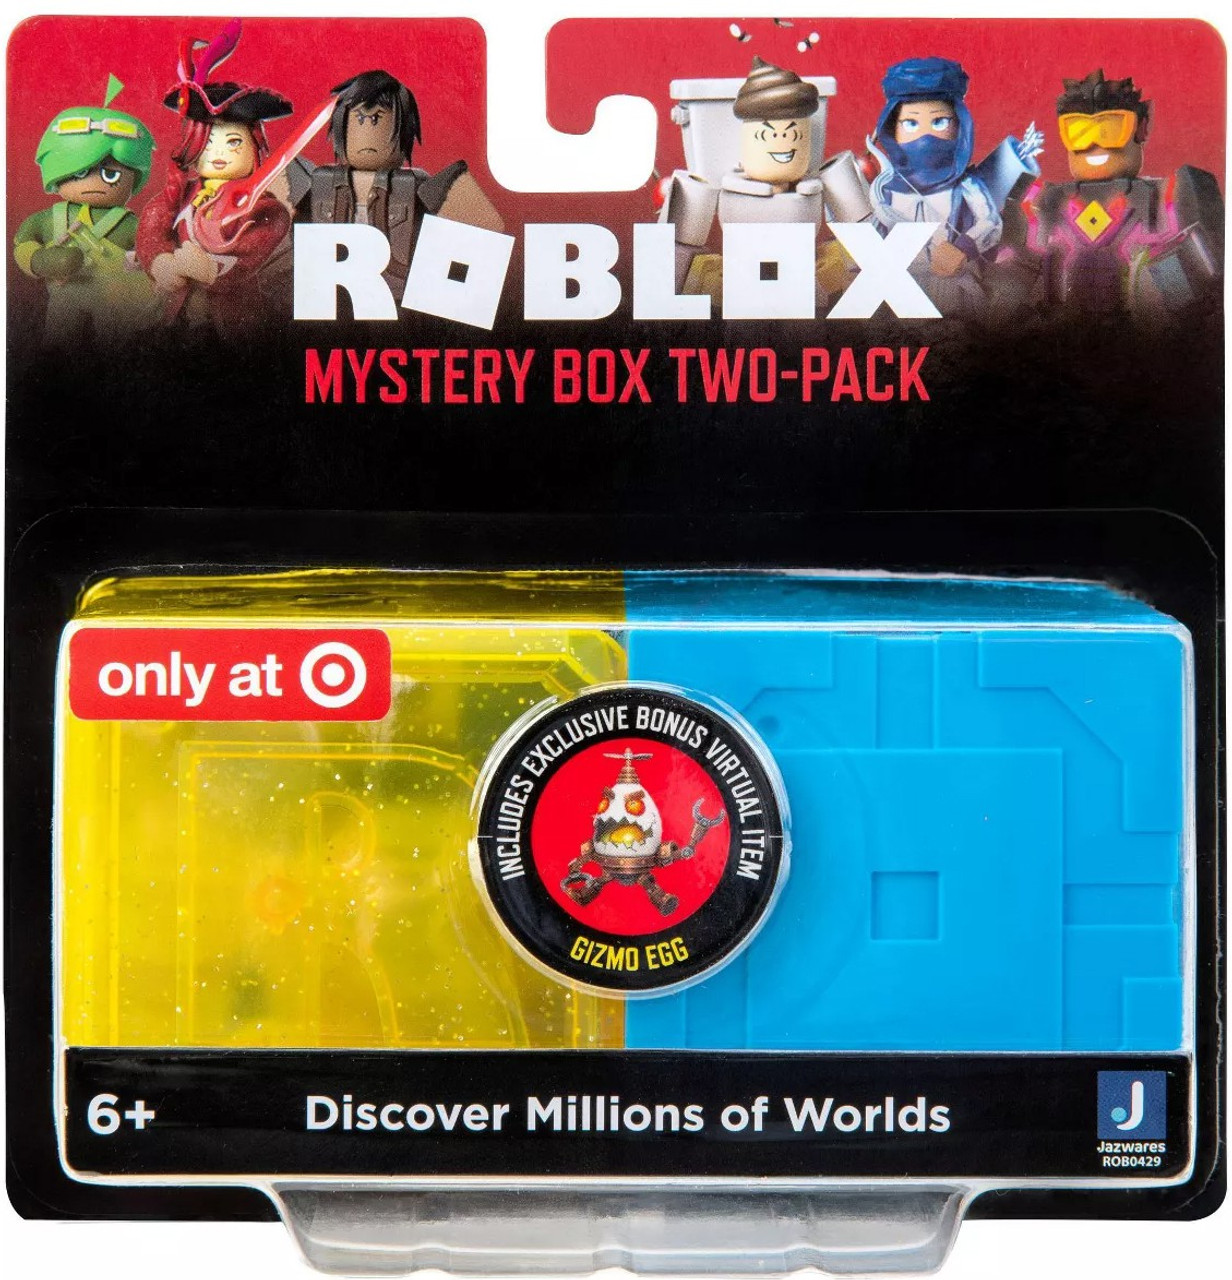 Roblox Series 9 Celebrity Series 7 Exclusive Mystery 2 Pack Easter Set Bonus Gizmo Egg Virtual Item Code Included Jazwares Toywiz - sailor moon them song roblox id